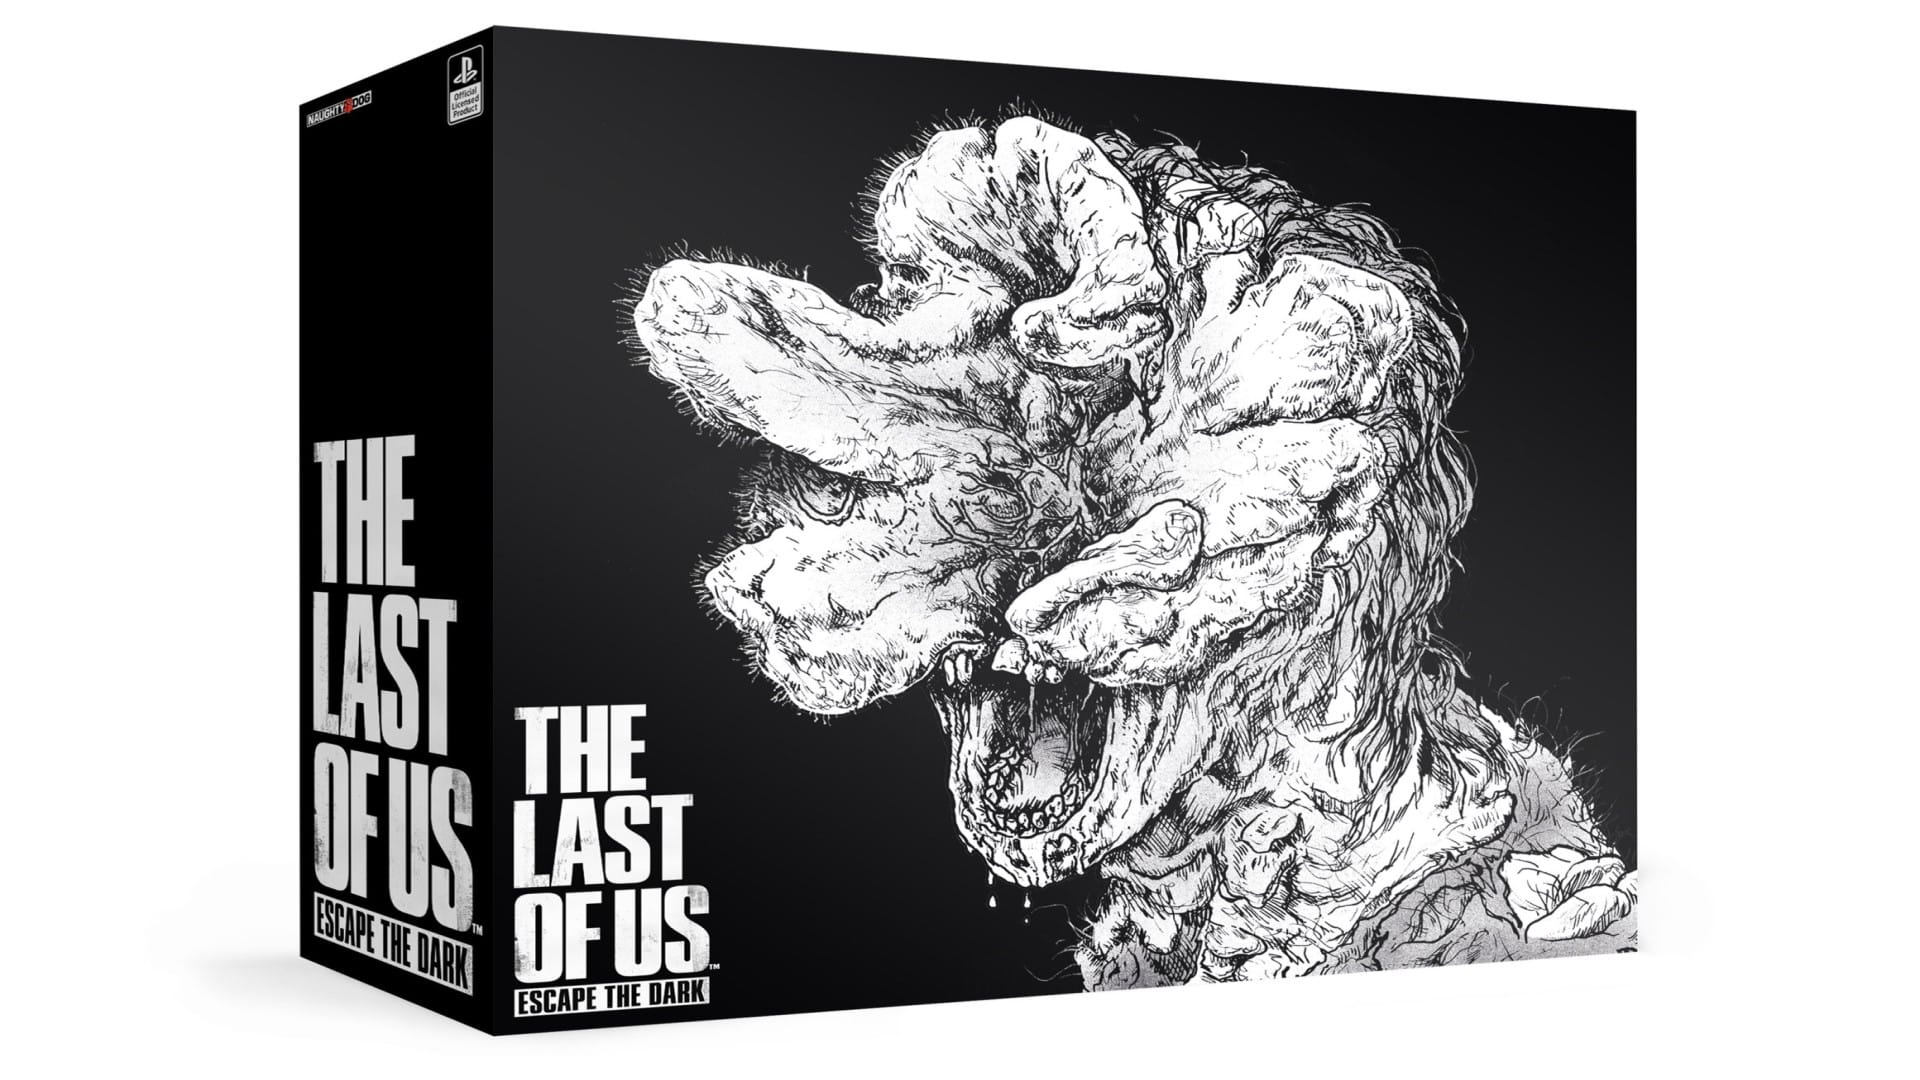 The Last of Us Board Game Announced By Naughty Dog | TechRaptor